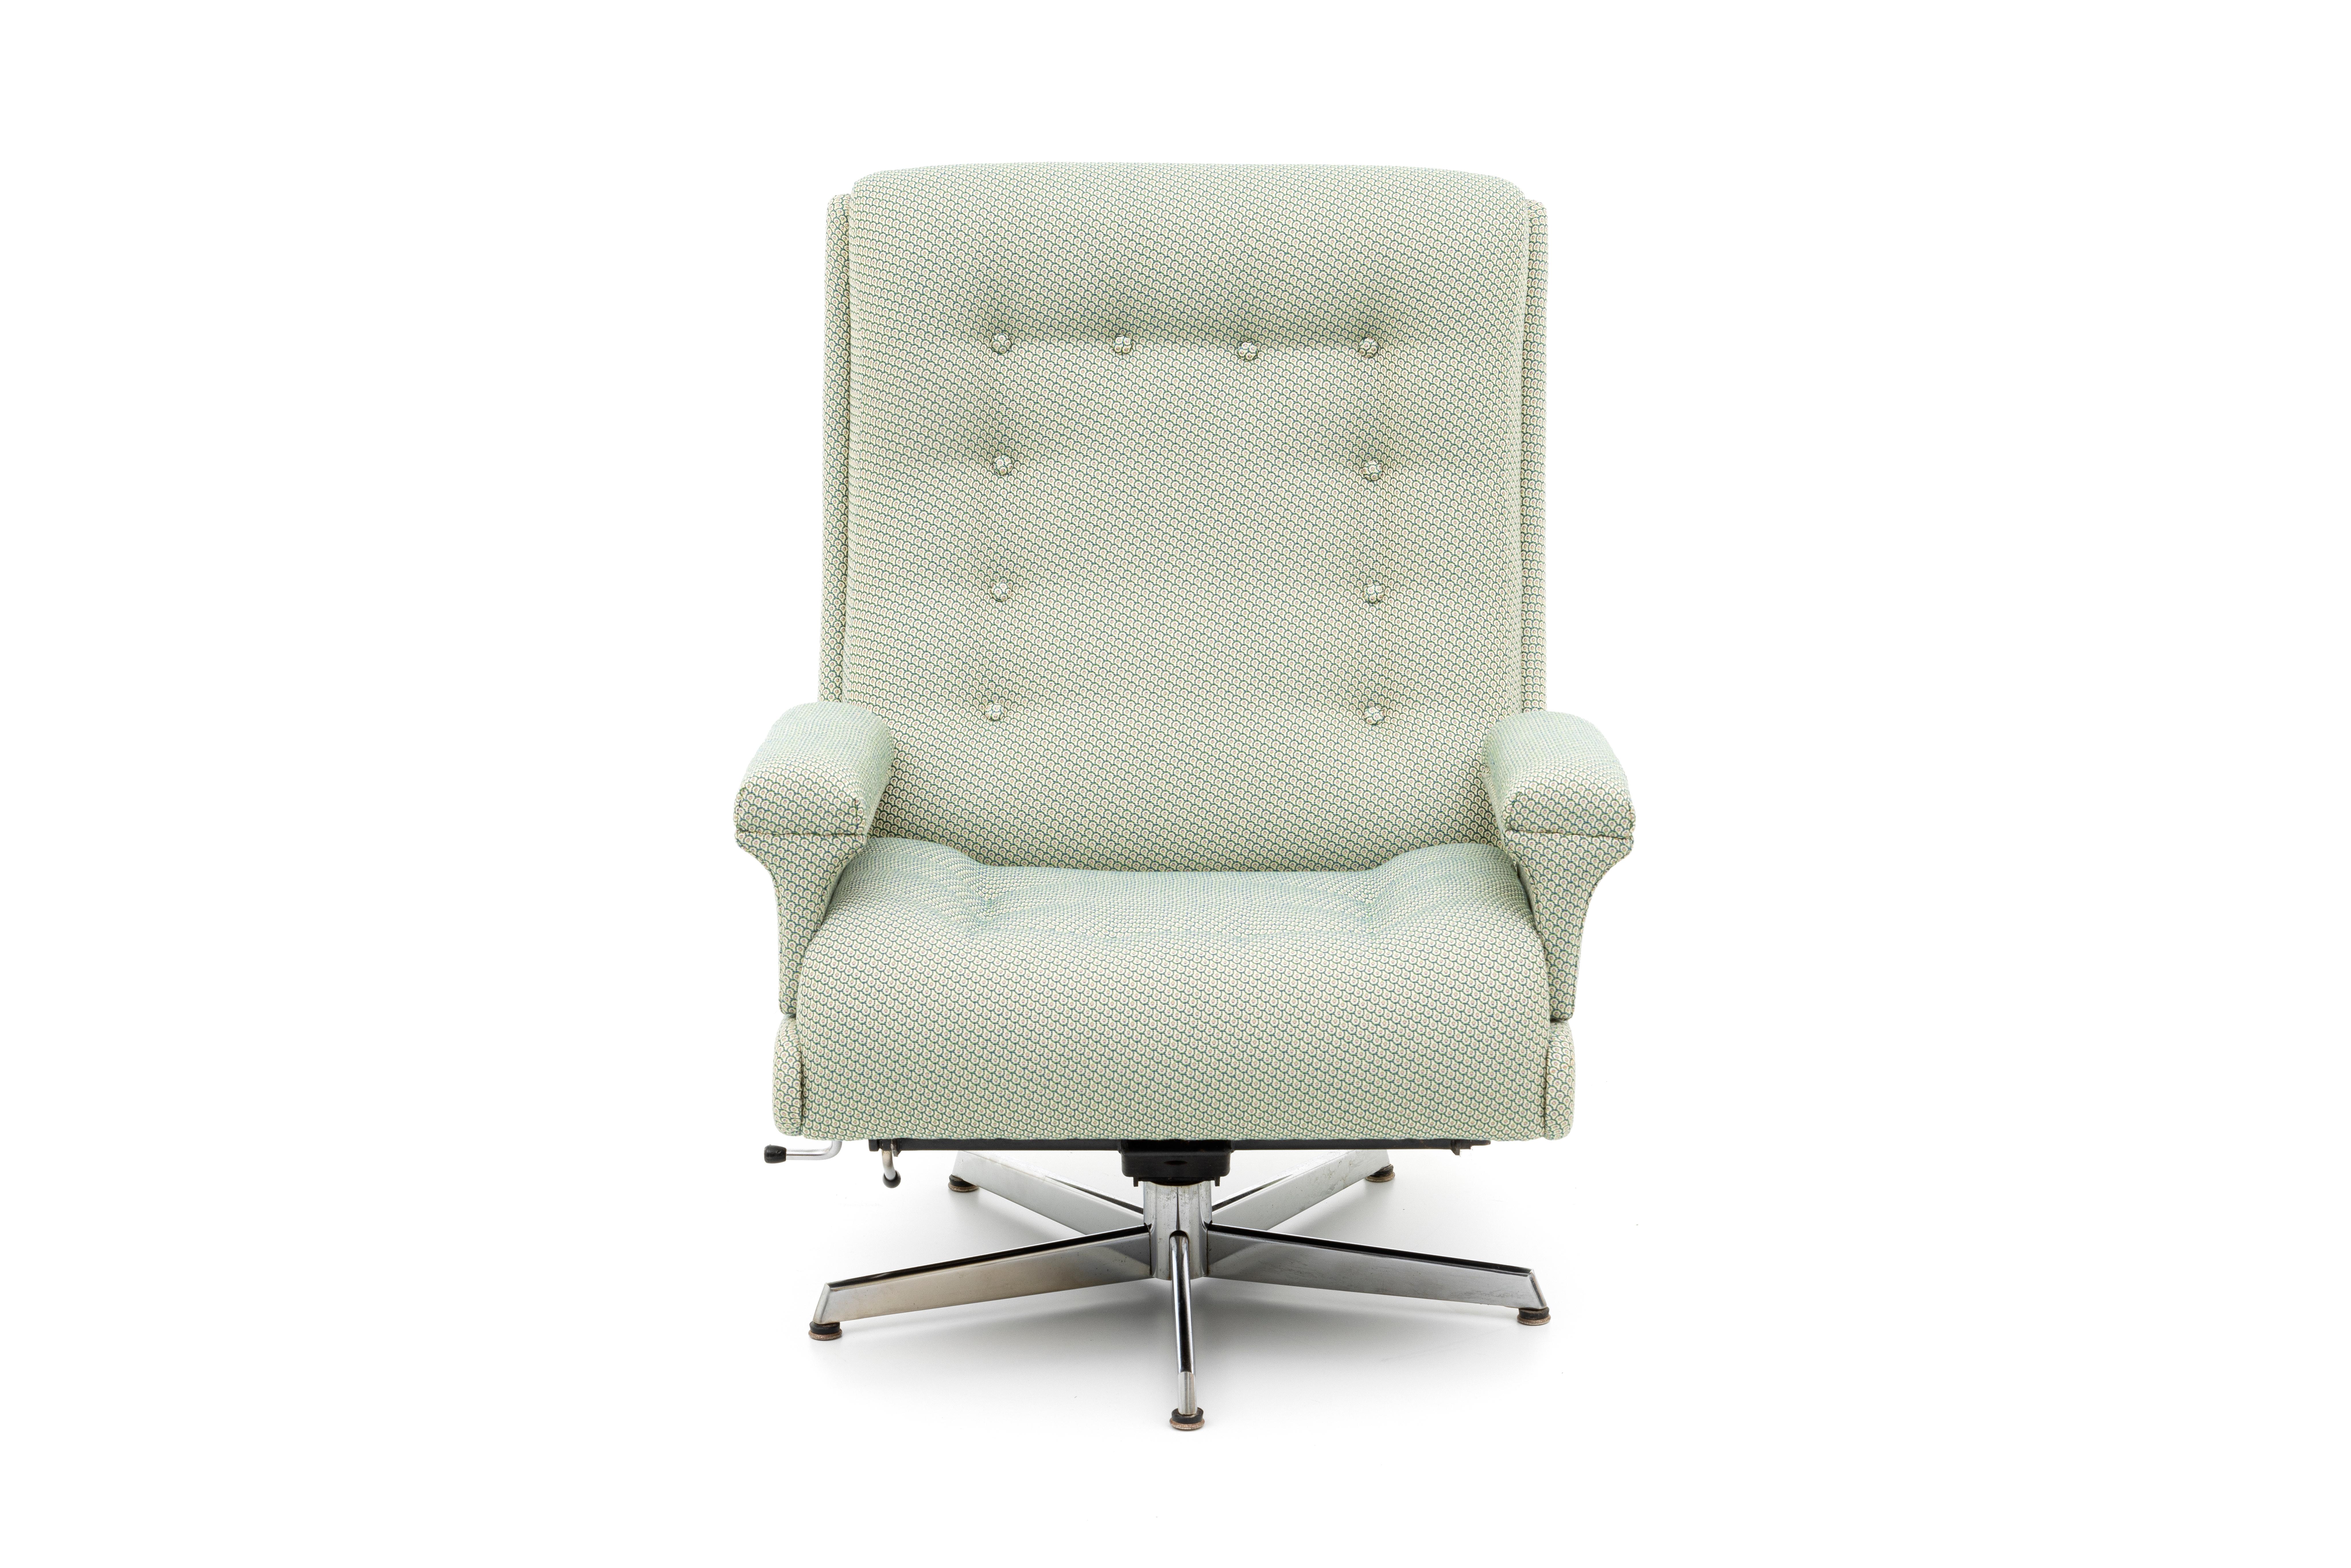 A robust vintage swivel office chair, found by Ding Dong and re-upholstered in Le Manach fabric.
The House of Le Manach is the very quintessence of French style, a subtle mix of French tradition and exoticism. It takes its inspiration from the silks